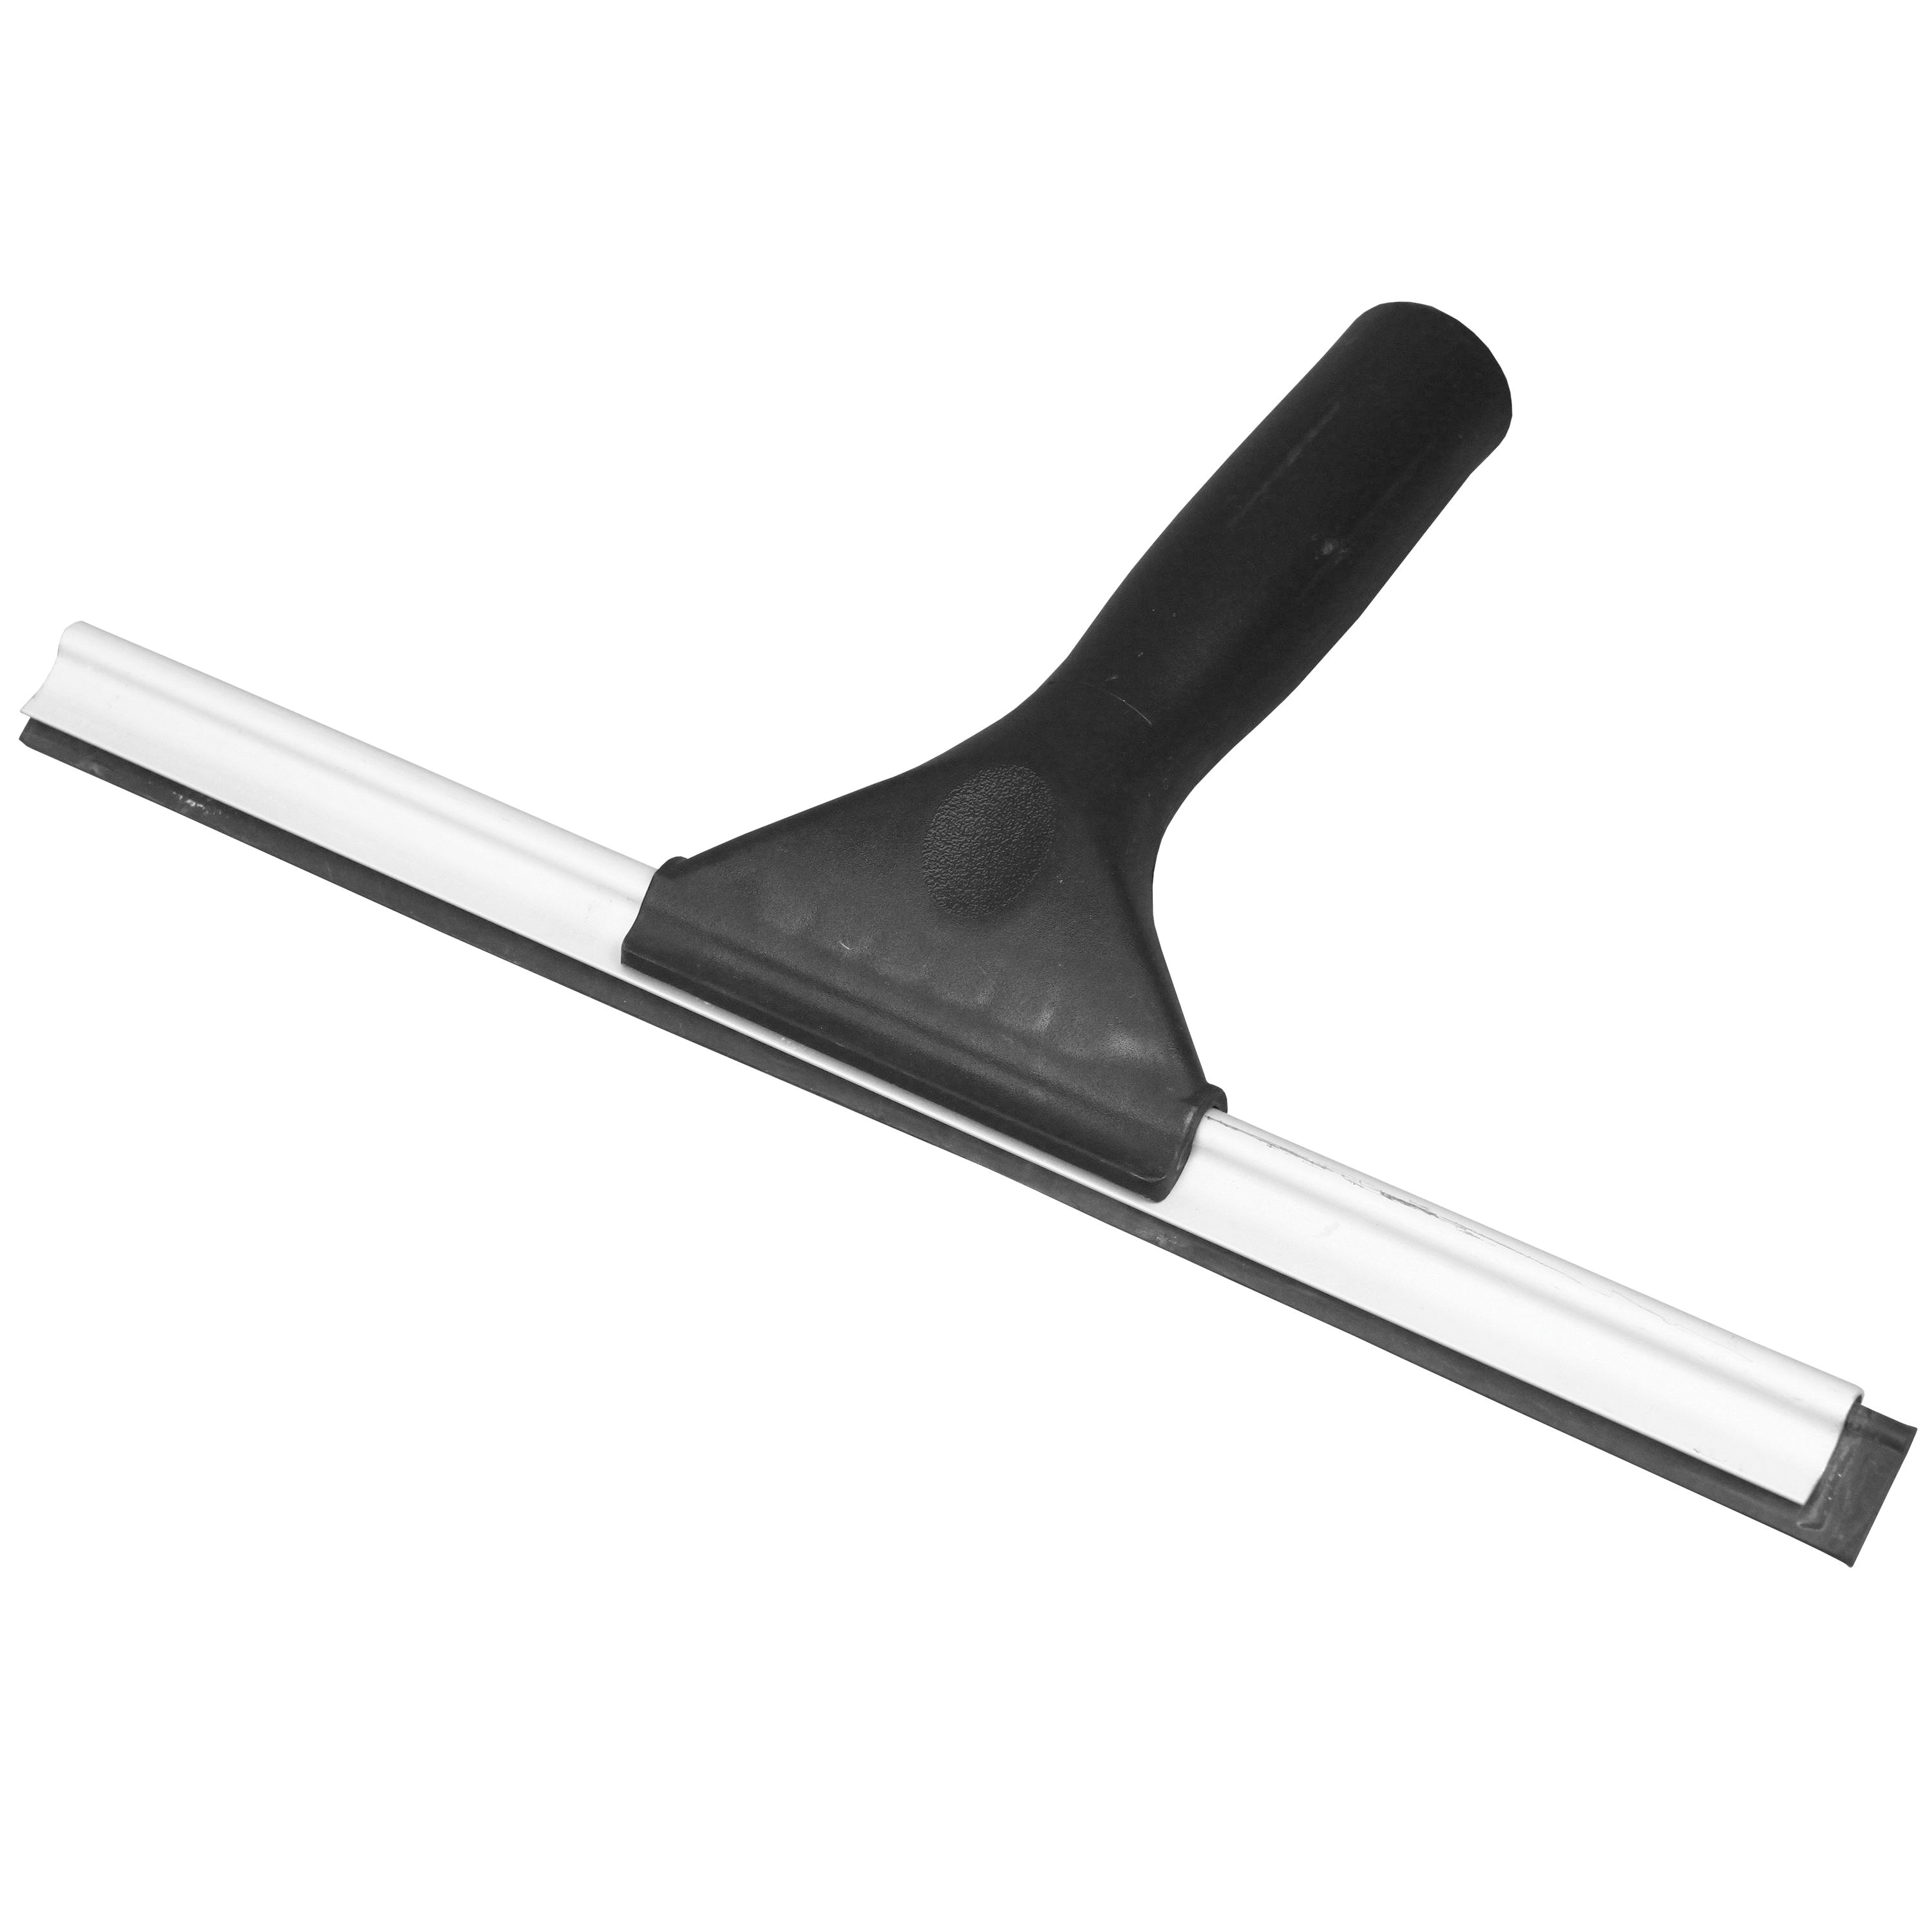 6112 12" WINDOW SQUEEGEEWITH PLASTIC HANDLE